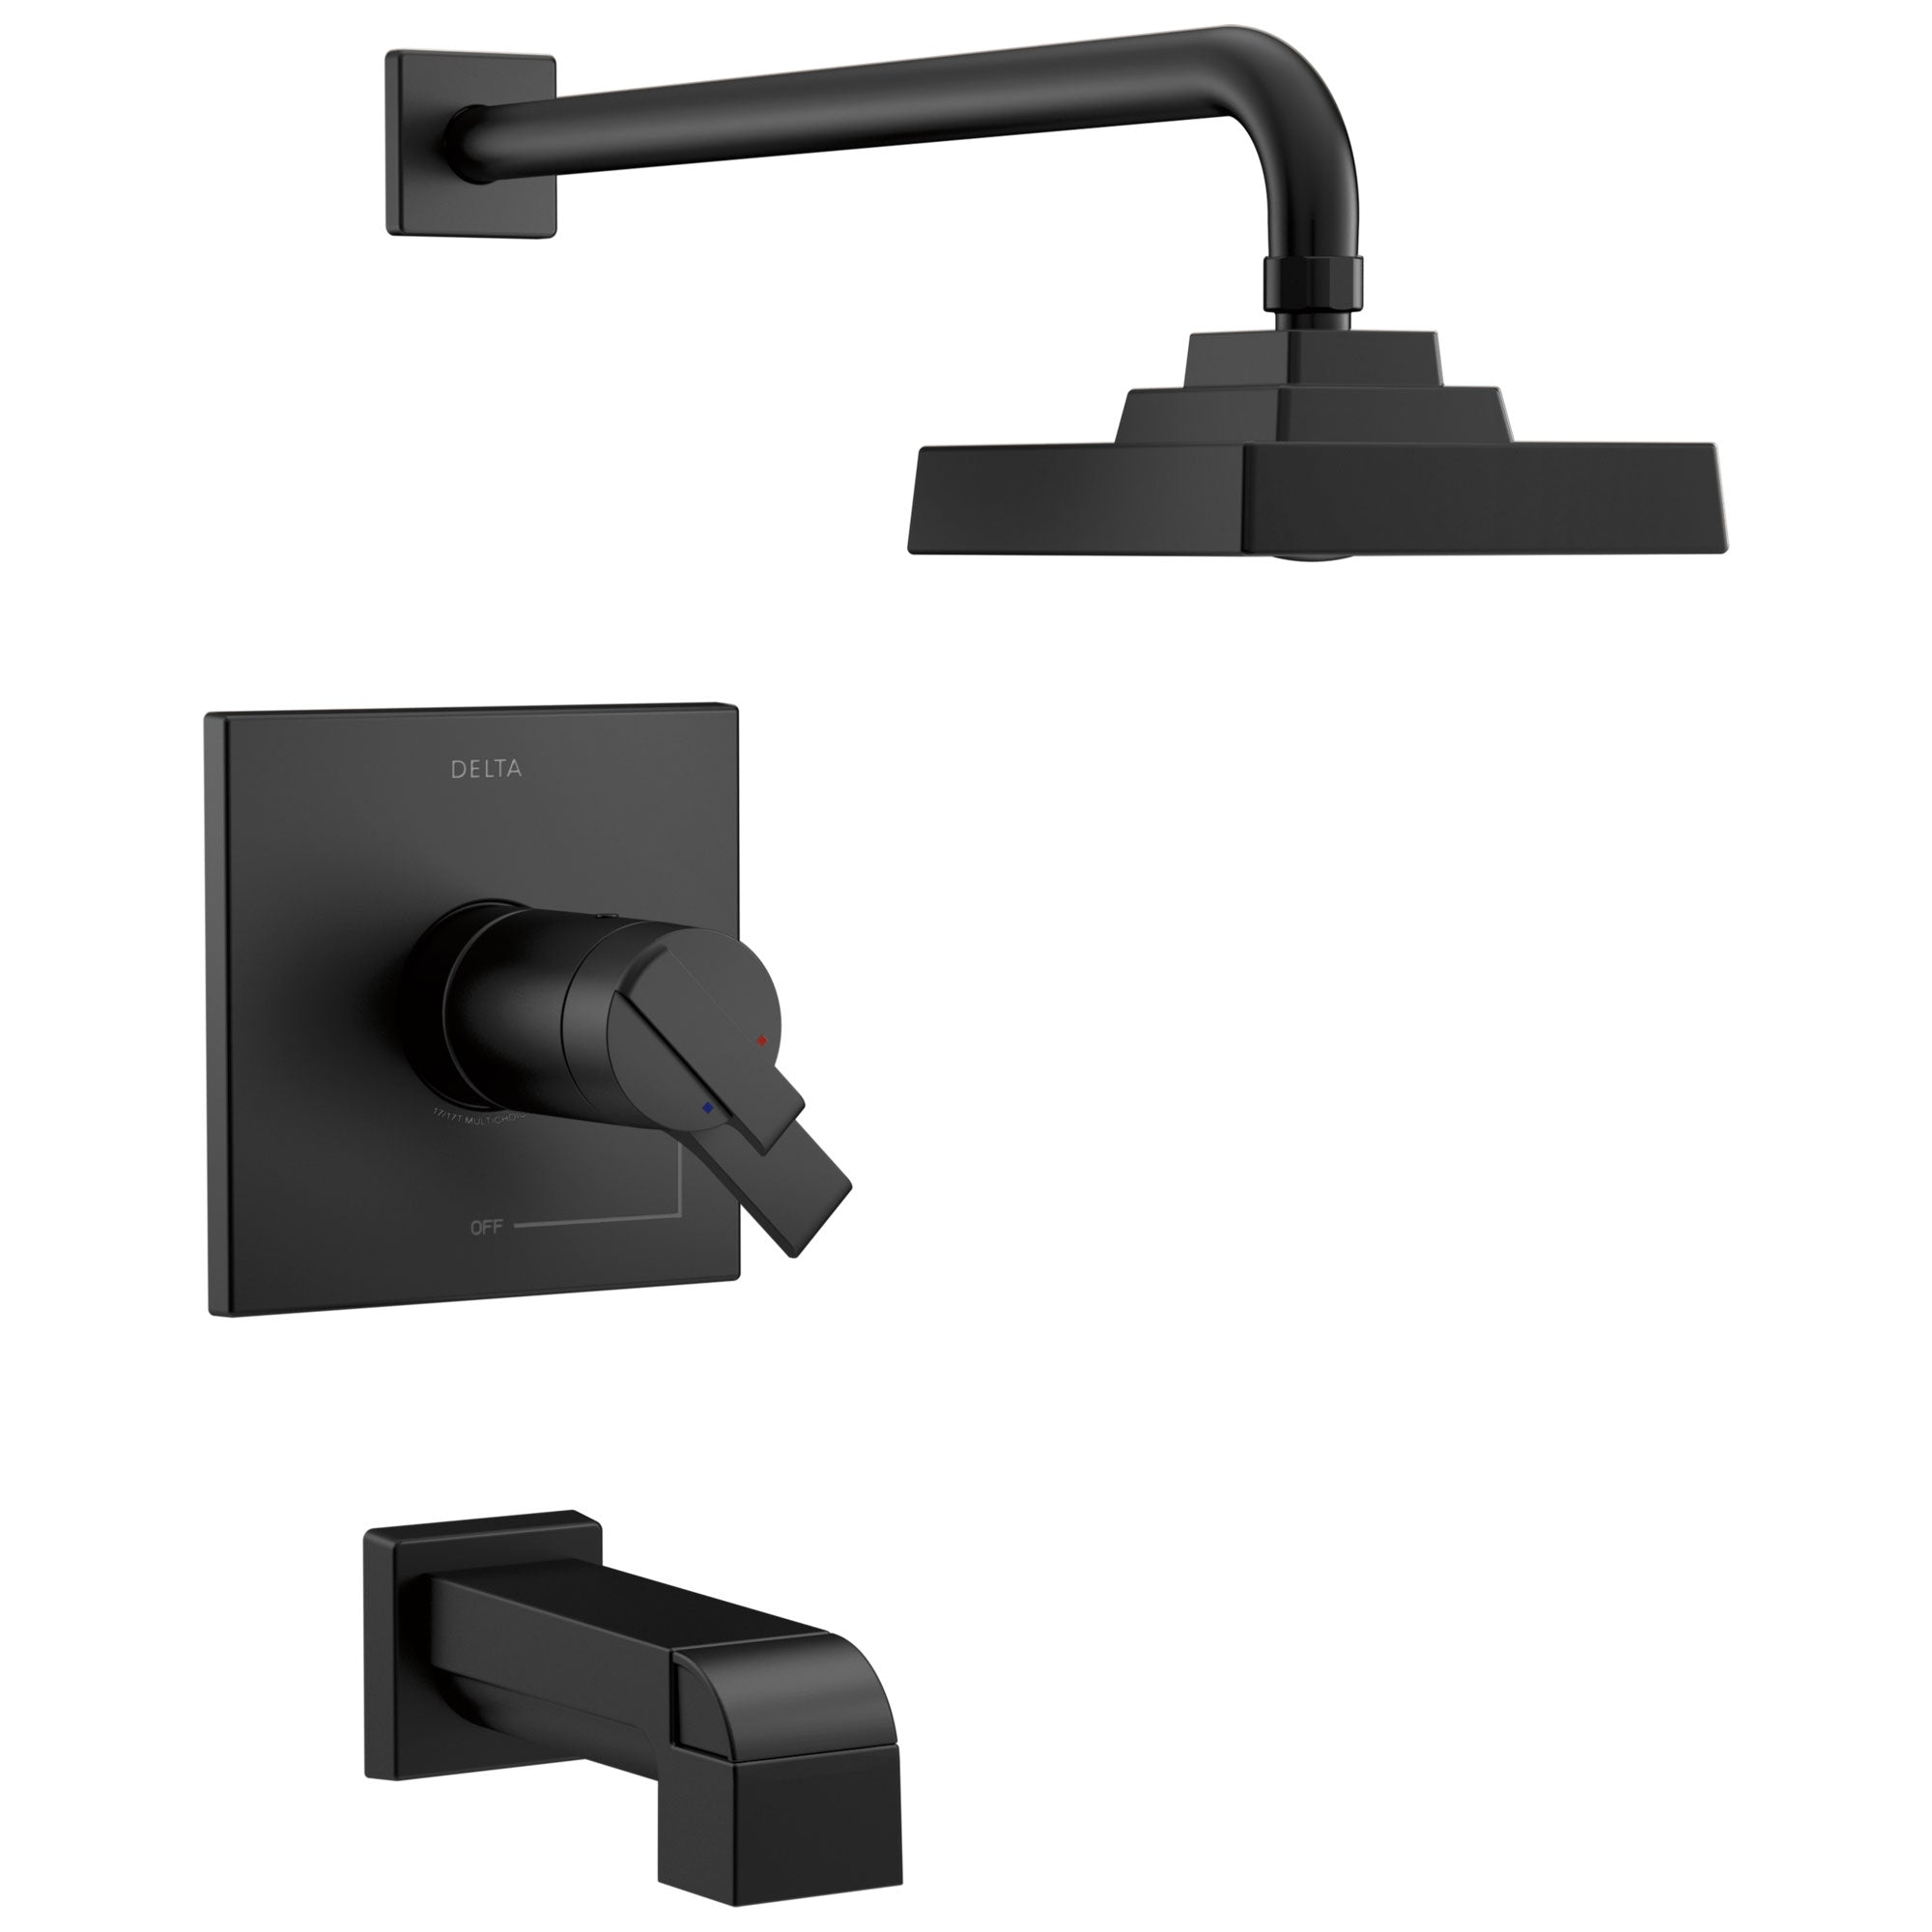 Delta Ara Matte Black Finish Thermostatic Tub and Shower Faucet Combo Includes Handles, 17T Cartridge, and Rough-in Valve without Stops D3626V